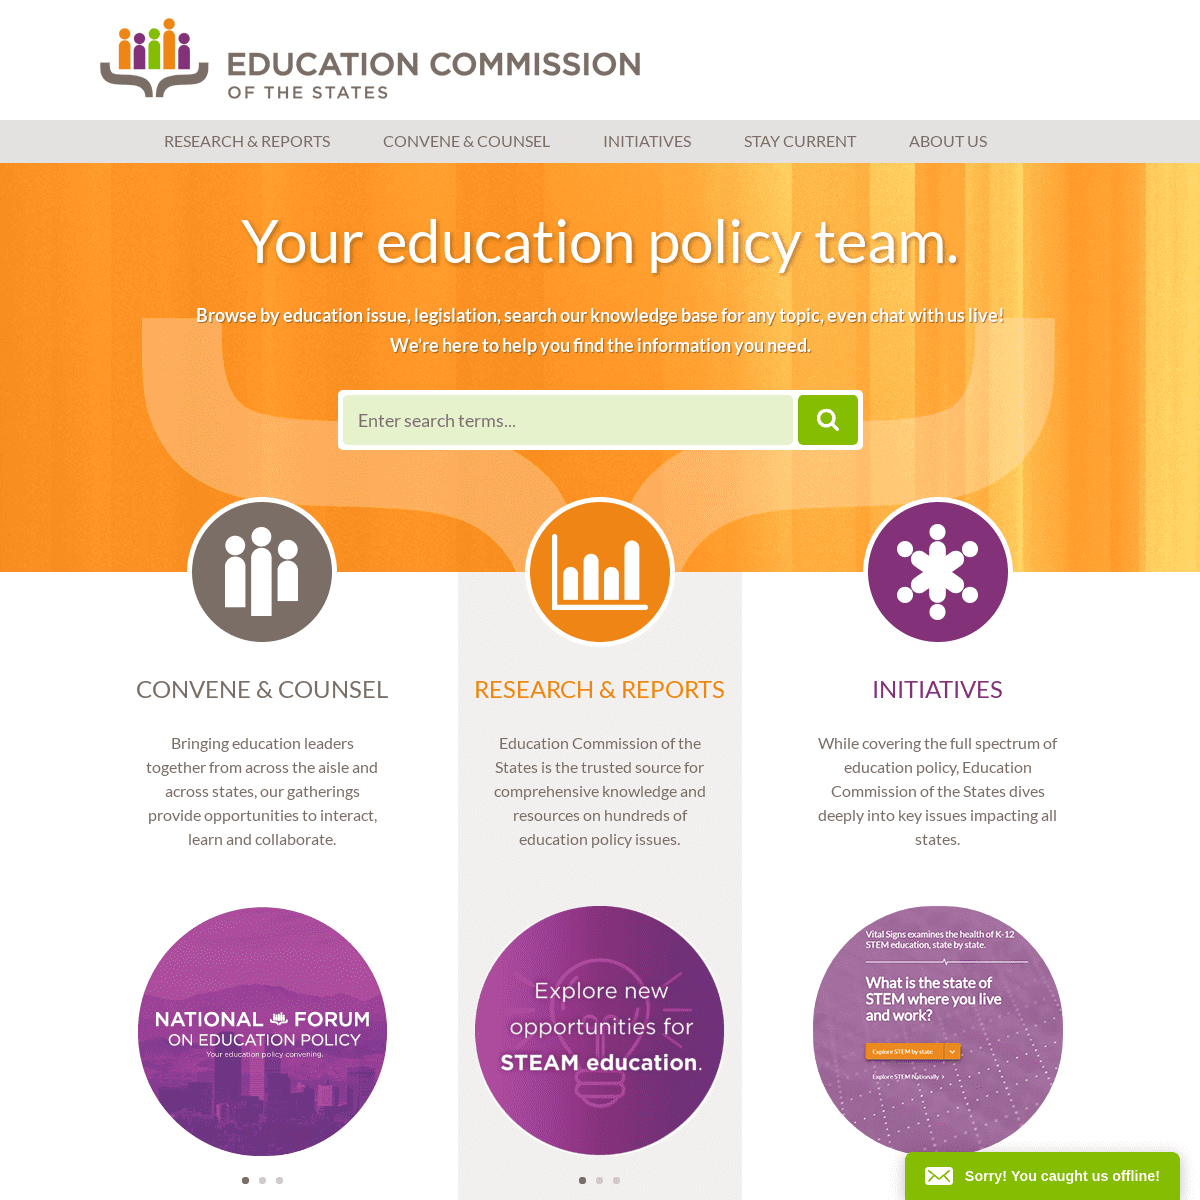 Home | Your Education Policy Team